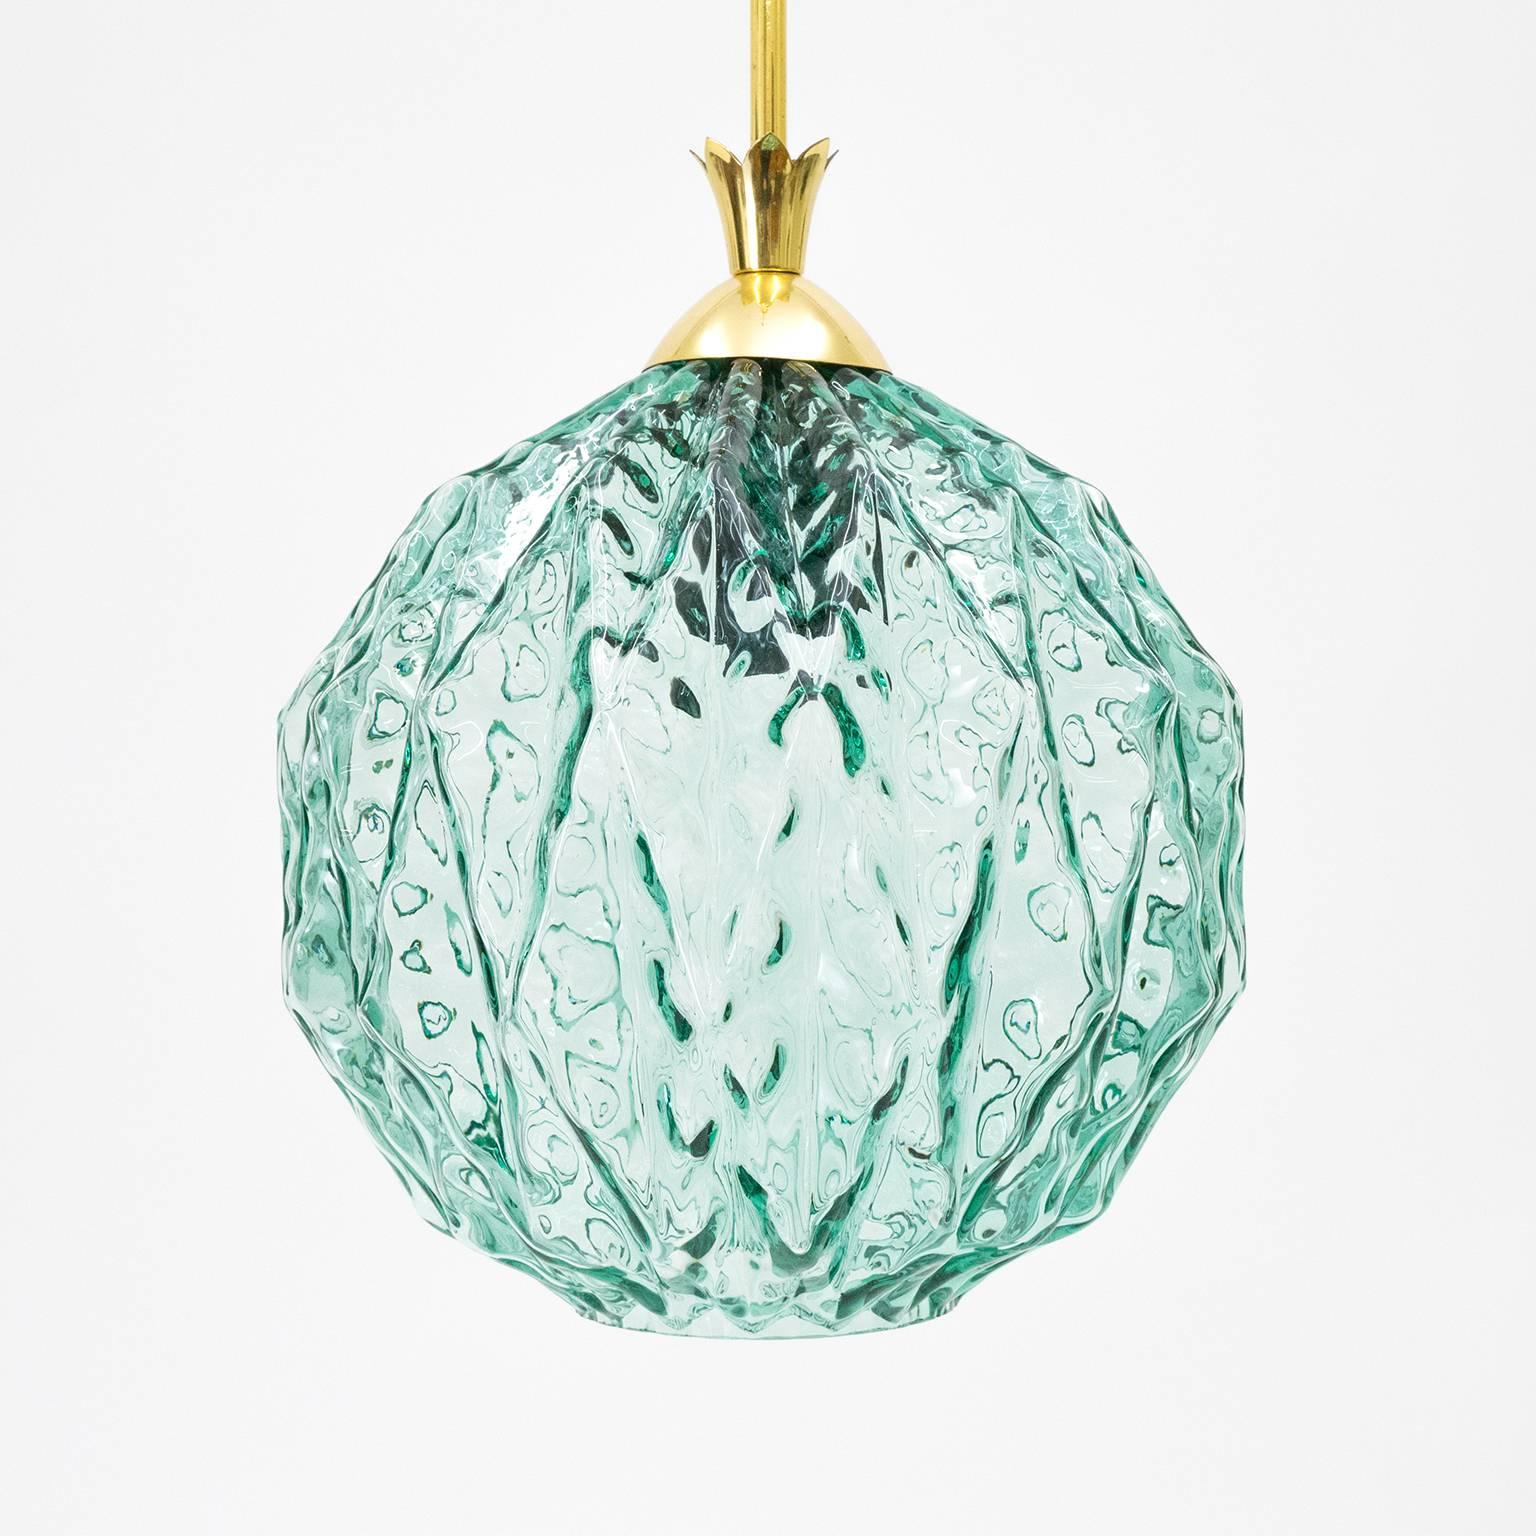 Very distinctive Italian Mid-Century glass pendants with polished brass hardware. The turquoise colored glass has a very unique geometric texture that appears to be melting wax-like. Highly unusual items that definitely stand out. One E27 socket